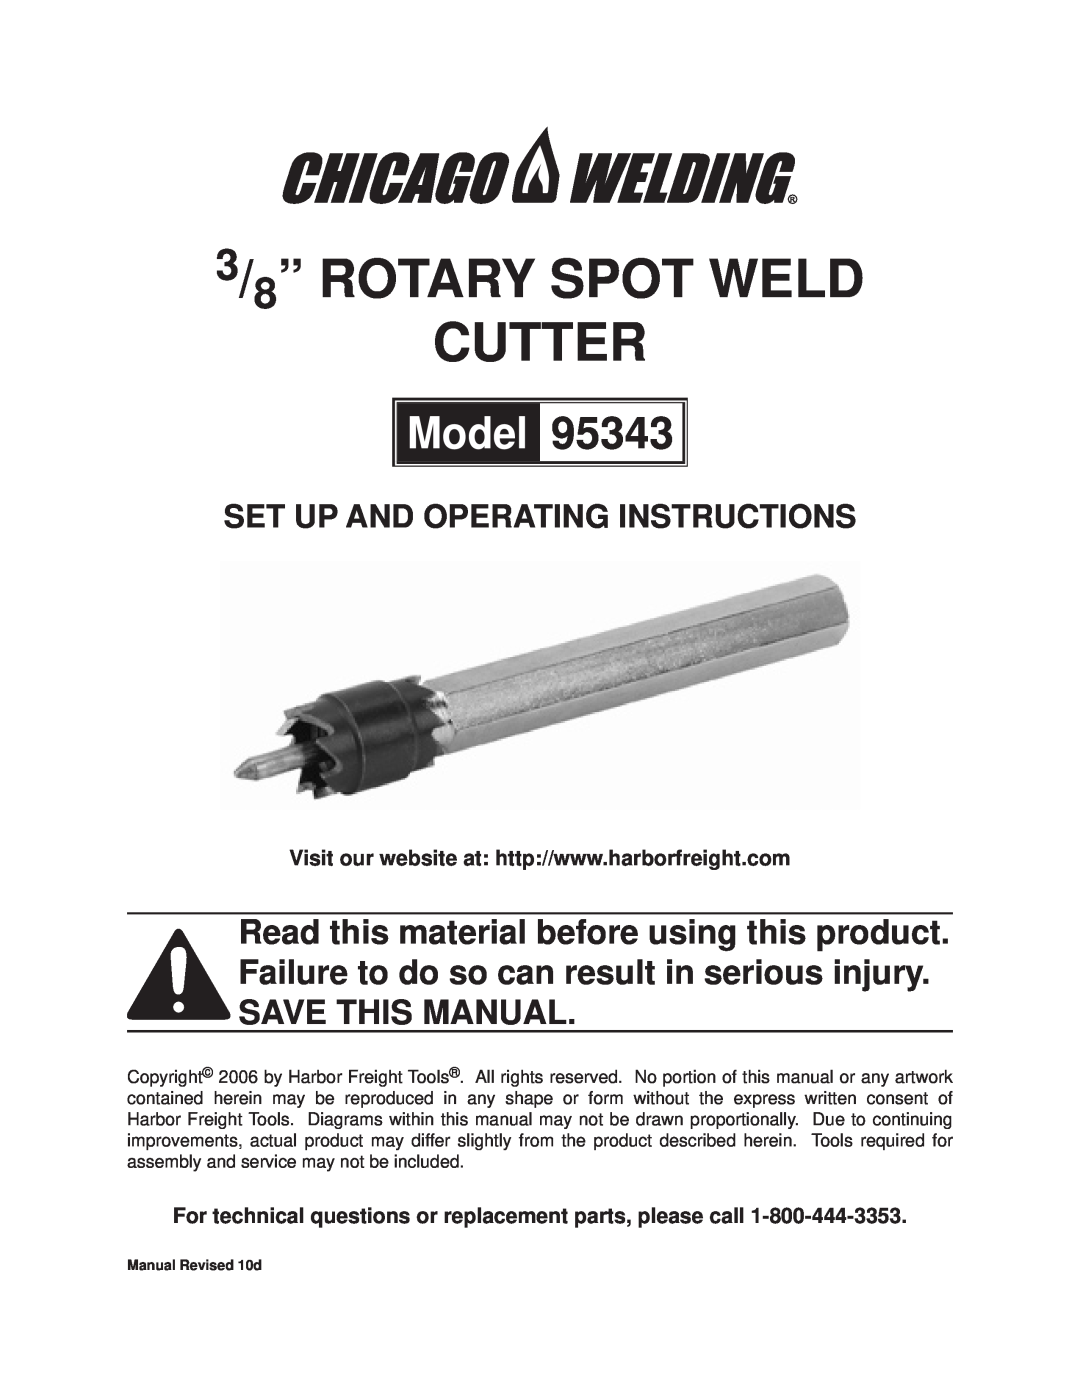 Harbor Freight Tools 95343 manual For technical questions or replacement parts, please call, 3/8” ROTARY SPOT WELD CUTTER 